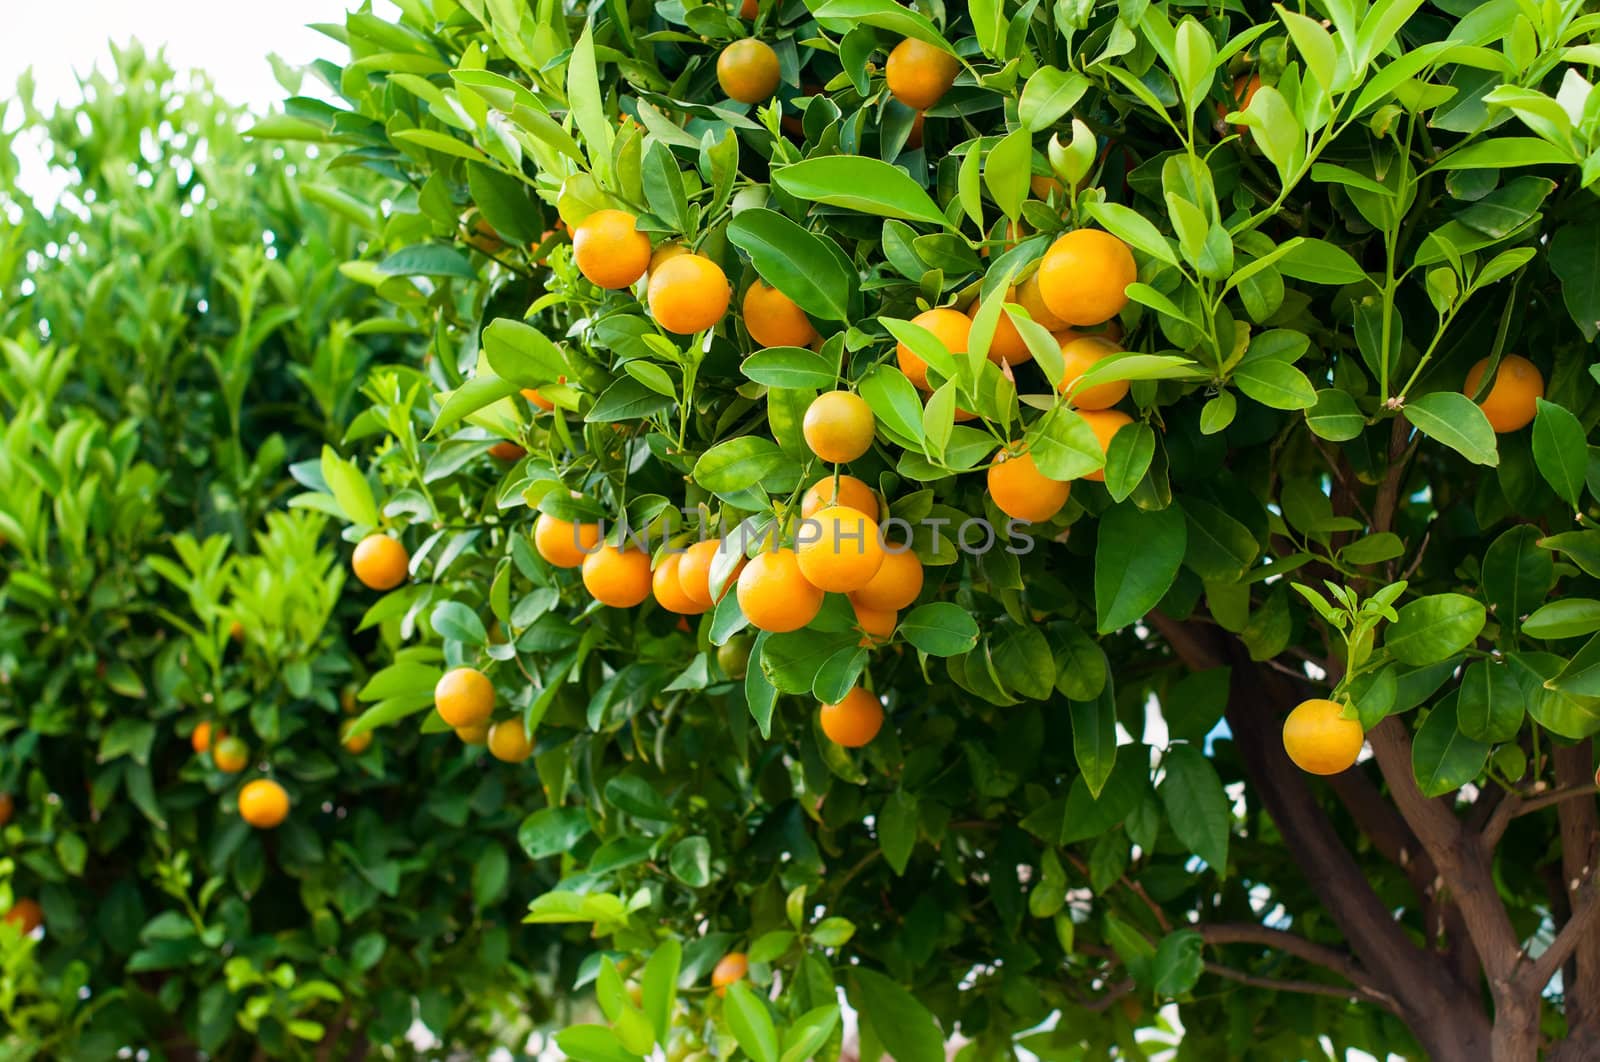 Branches with the fruits of the tangerine trees, Montenegro